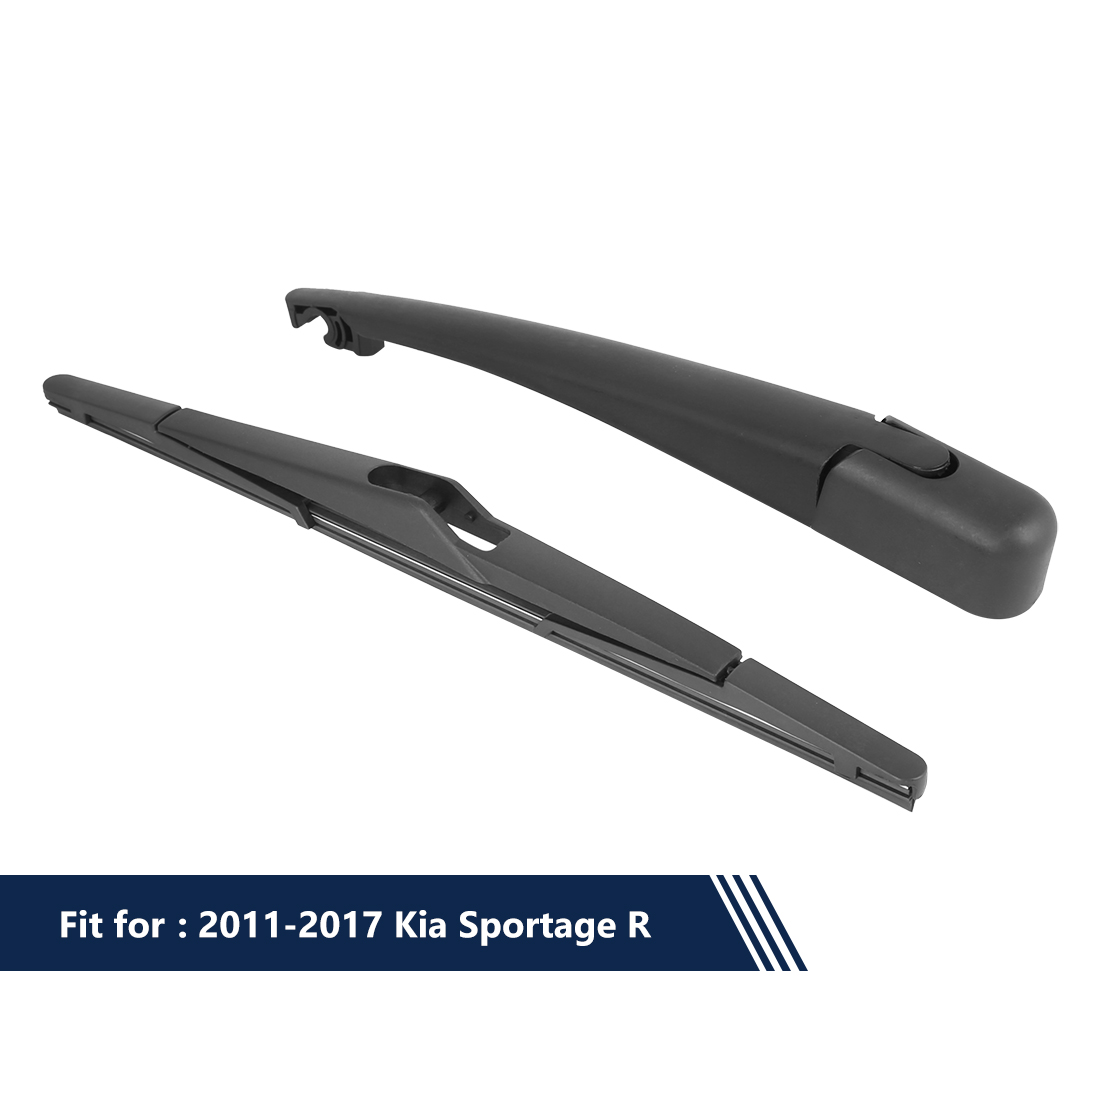 Black Rear Windshield Wiper Blade Arm Set for for Kia Sportage R 2011-2017 12" 310mm - image 6 of 6